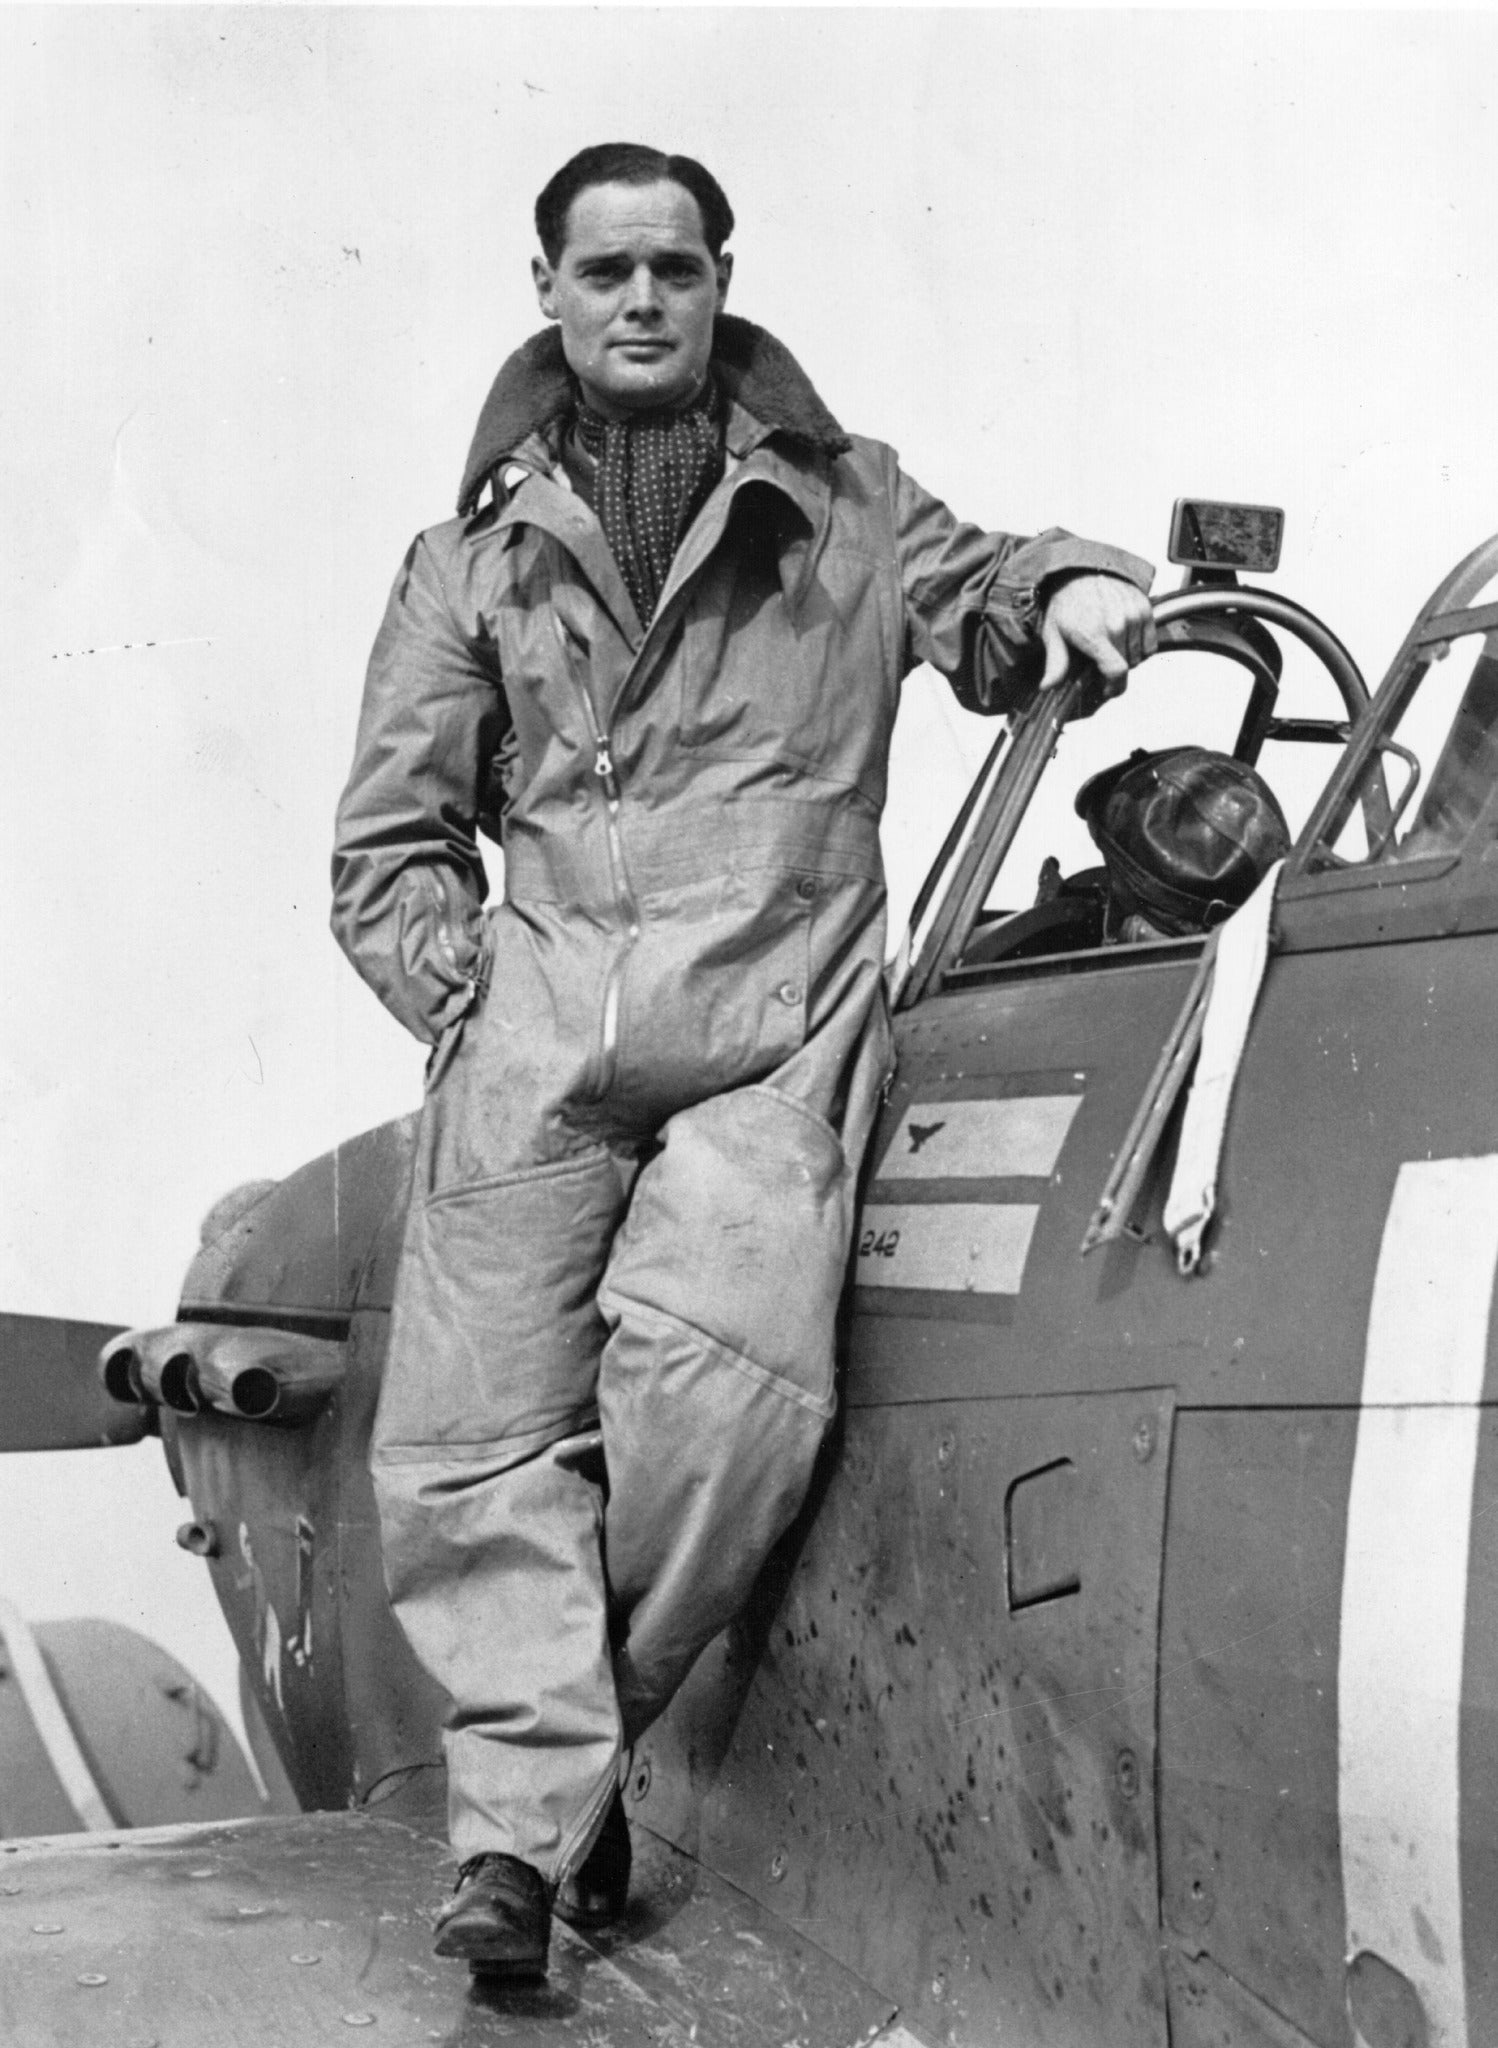 Group Captain Douglas Bader:  WW2 Double Amputee Ace Fighter Pilot